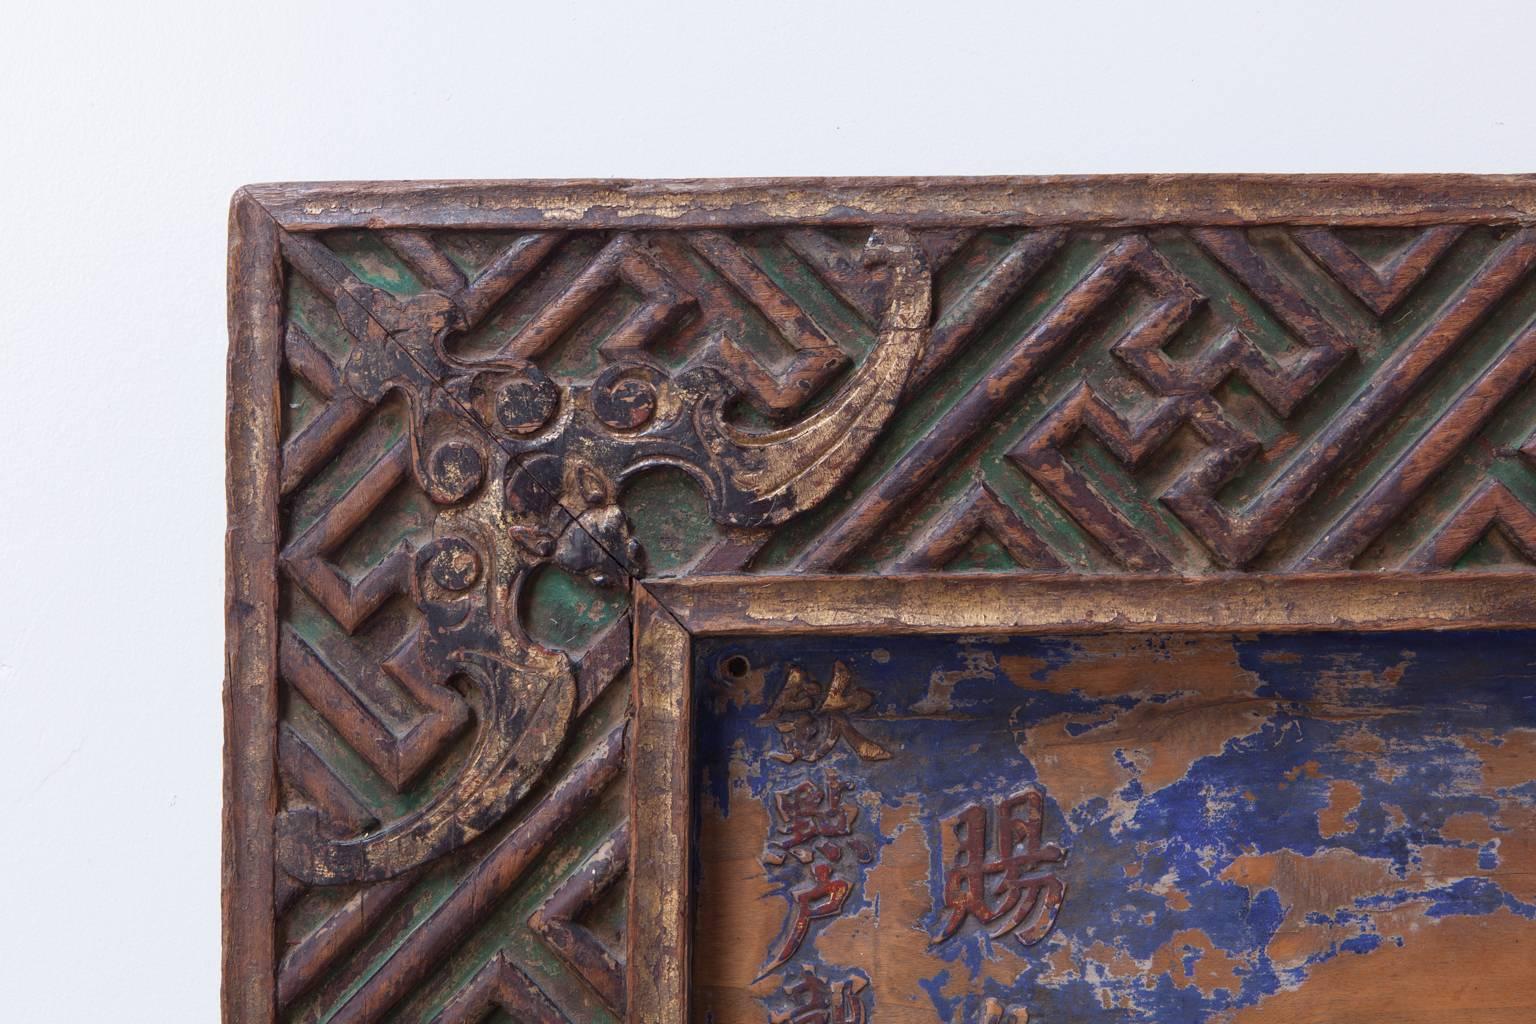 Remarkable Chinese honorary plaque featuring a large four character inscription and intricately carved geometric wan fret border with bats on all four corners and center. Traces of green lacquer pigment color still remain on borders with blue and